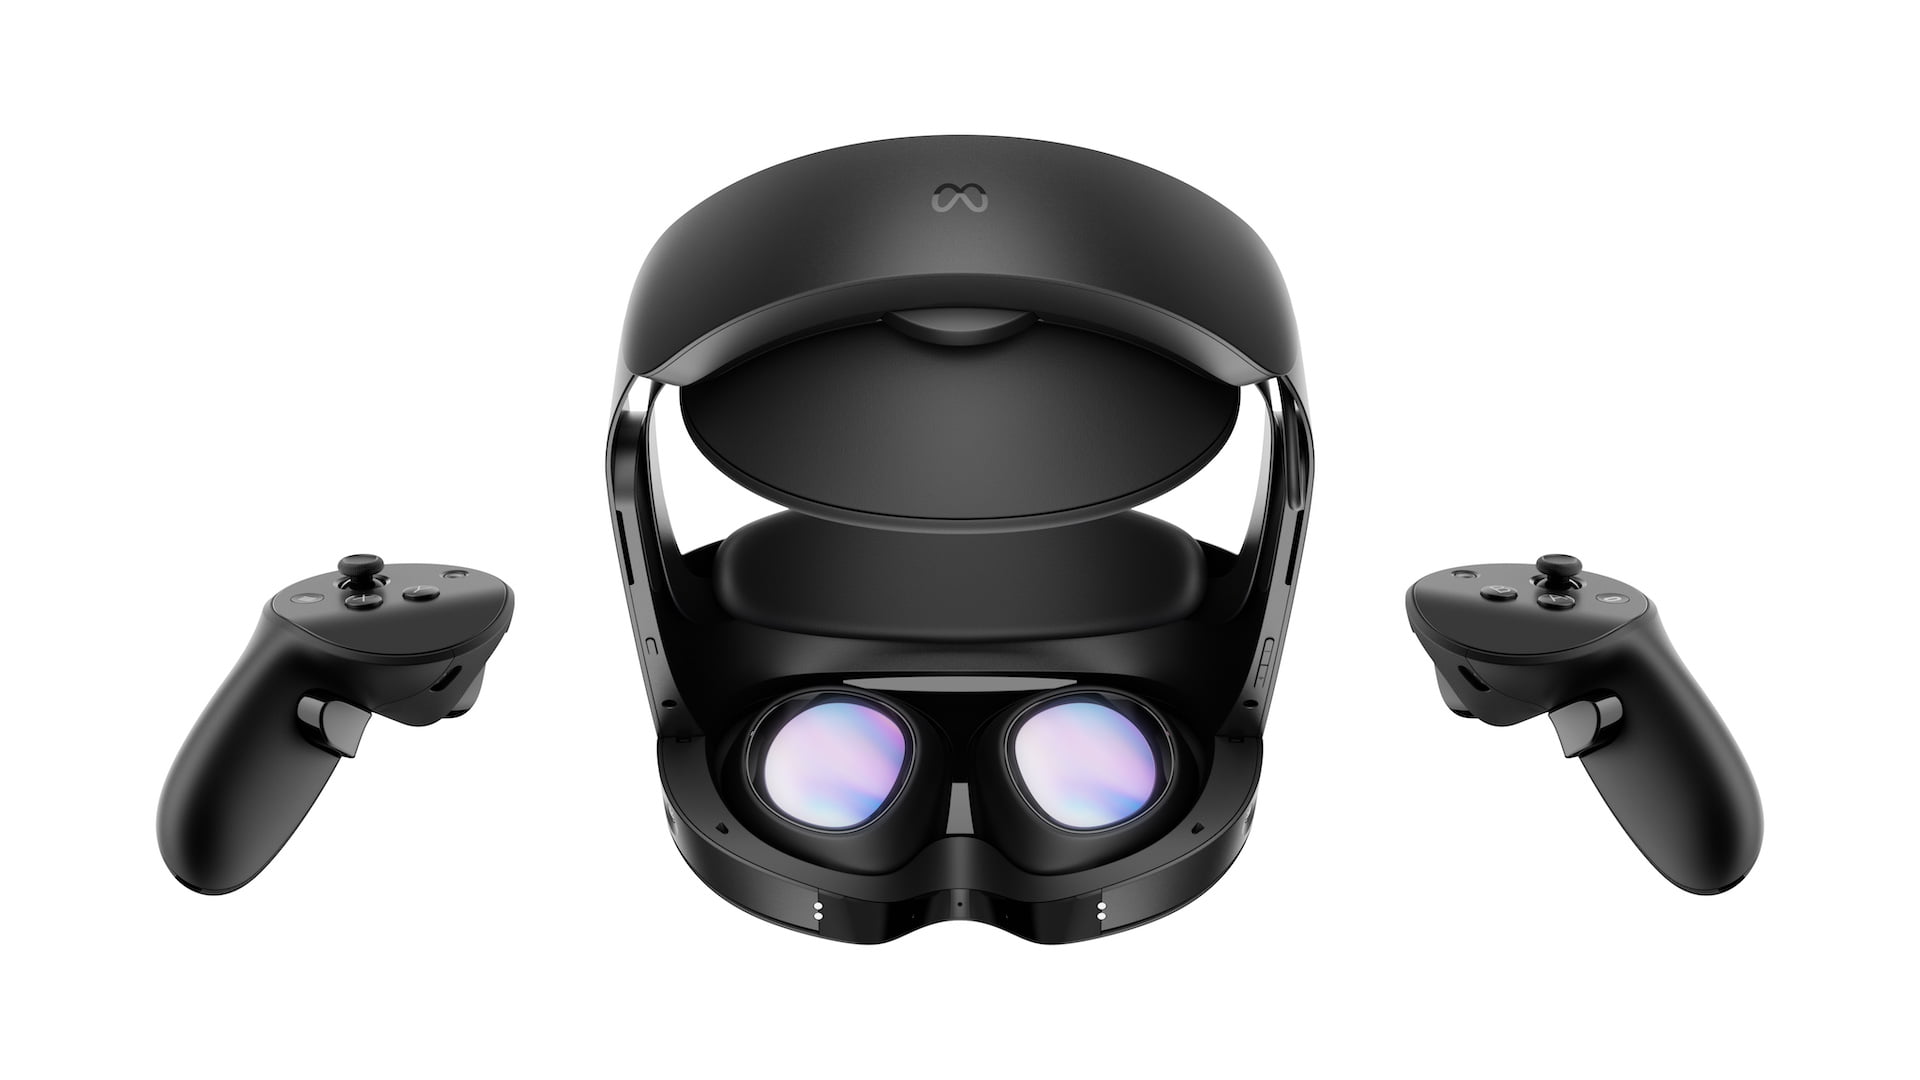 The Meta Quest Pro VR headset and controllers, seen from the back